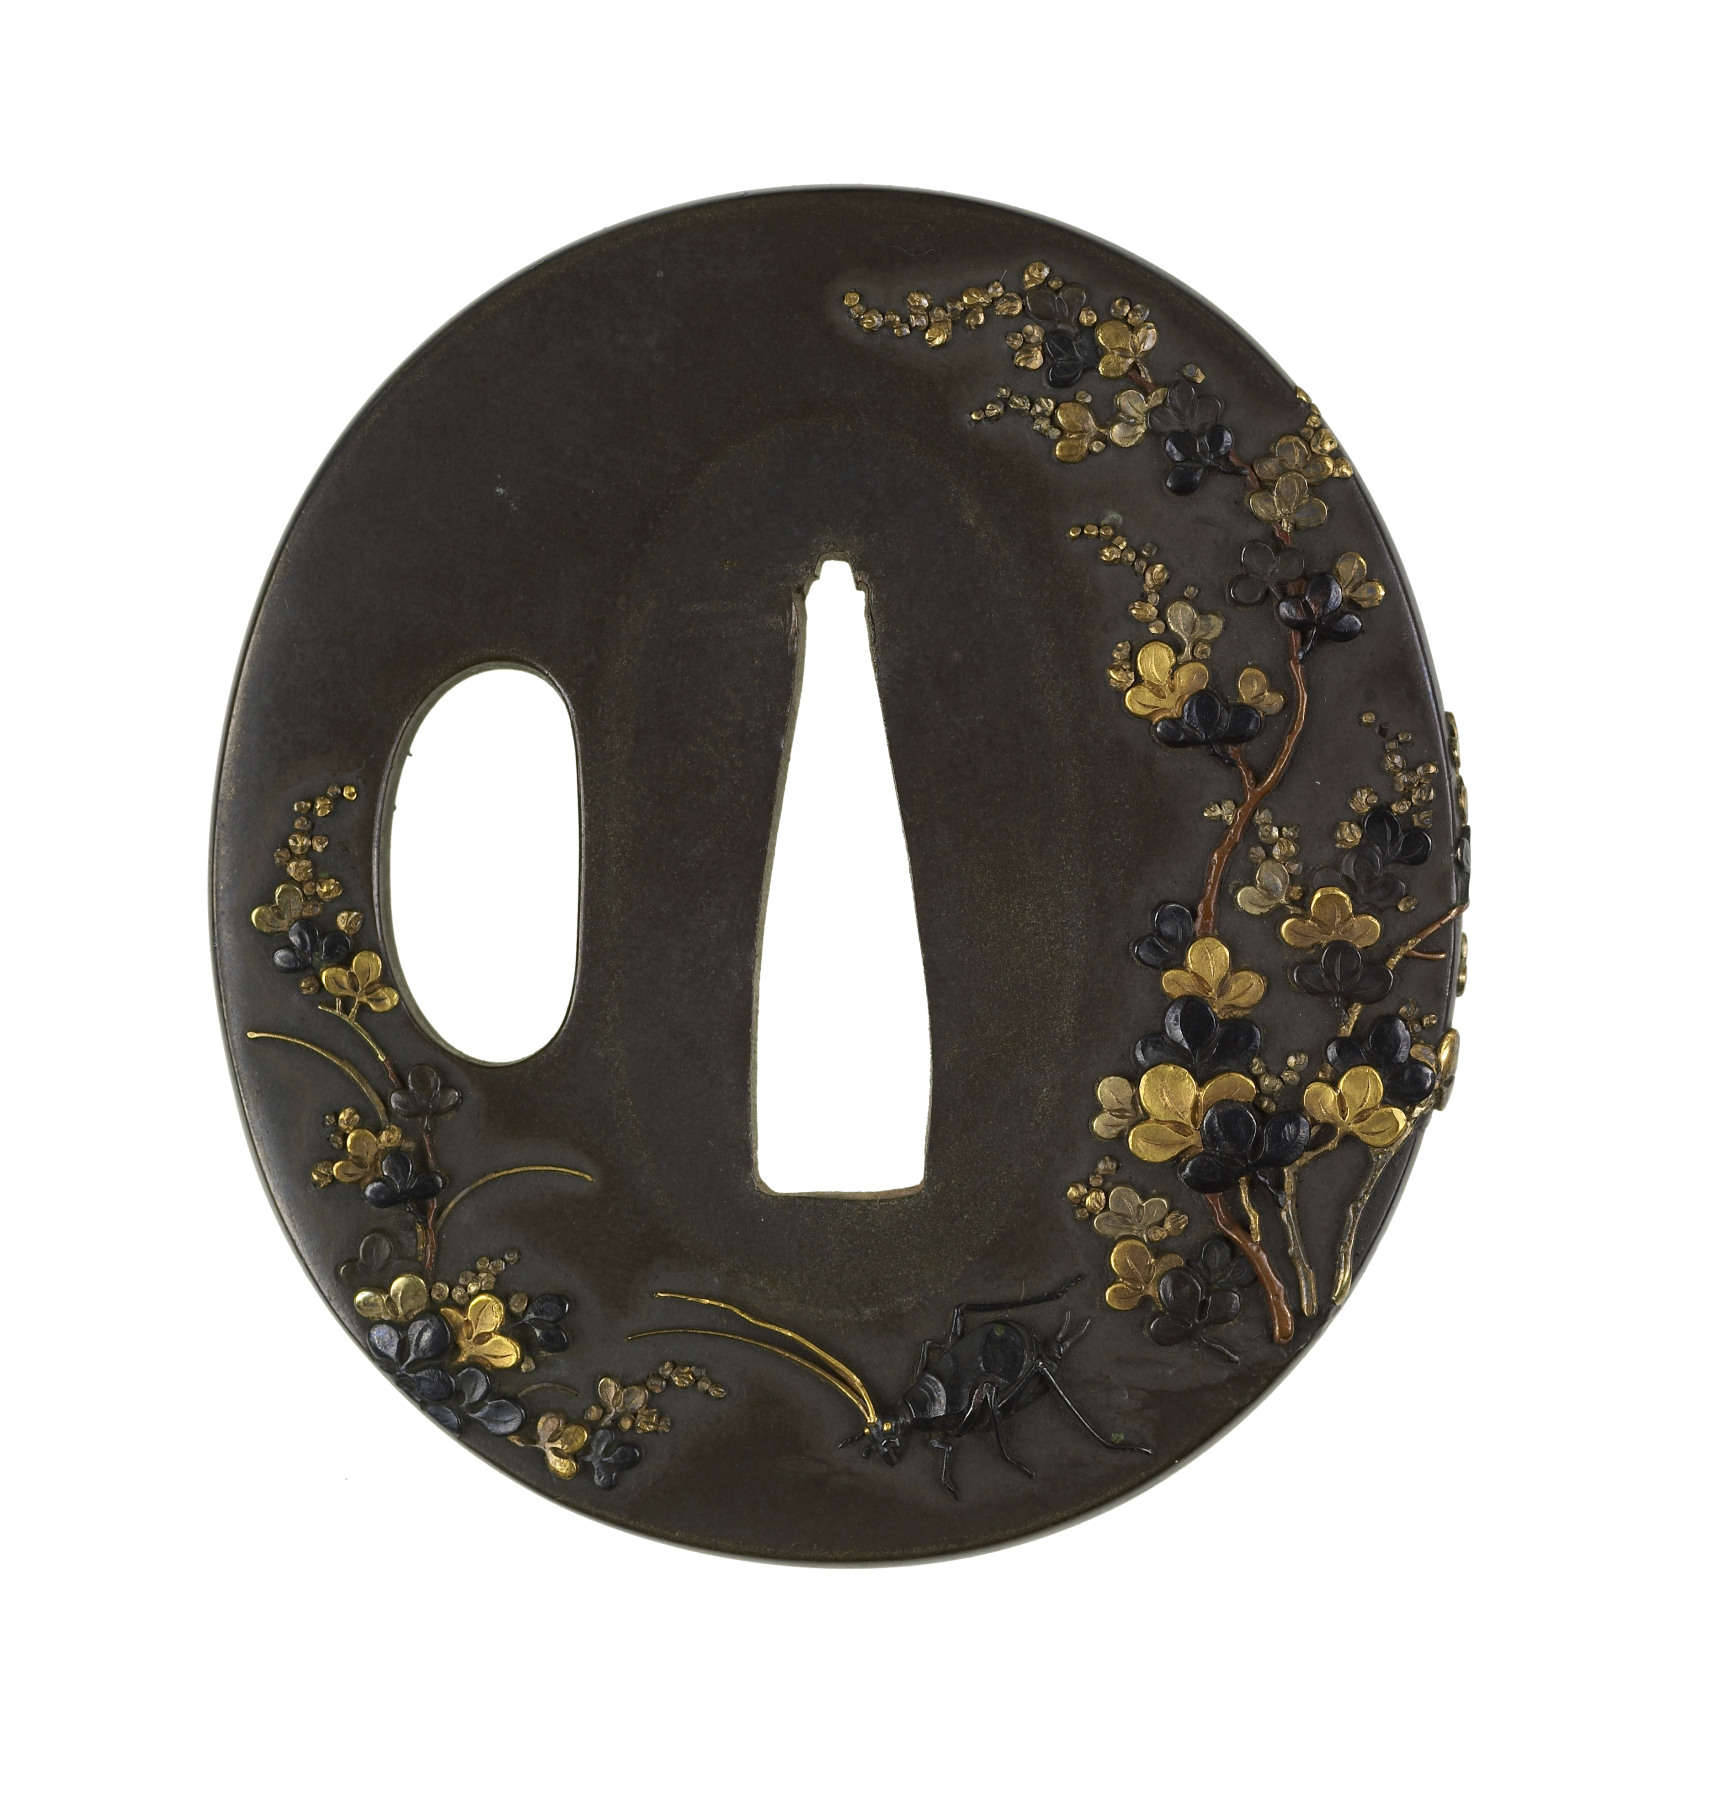 Image for Tsuba with a Cricket and Dragonfly in Bush Clover